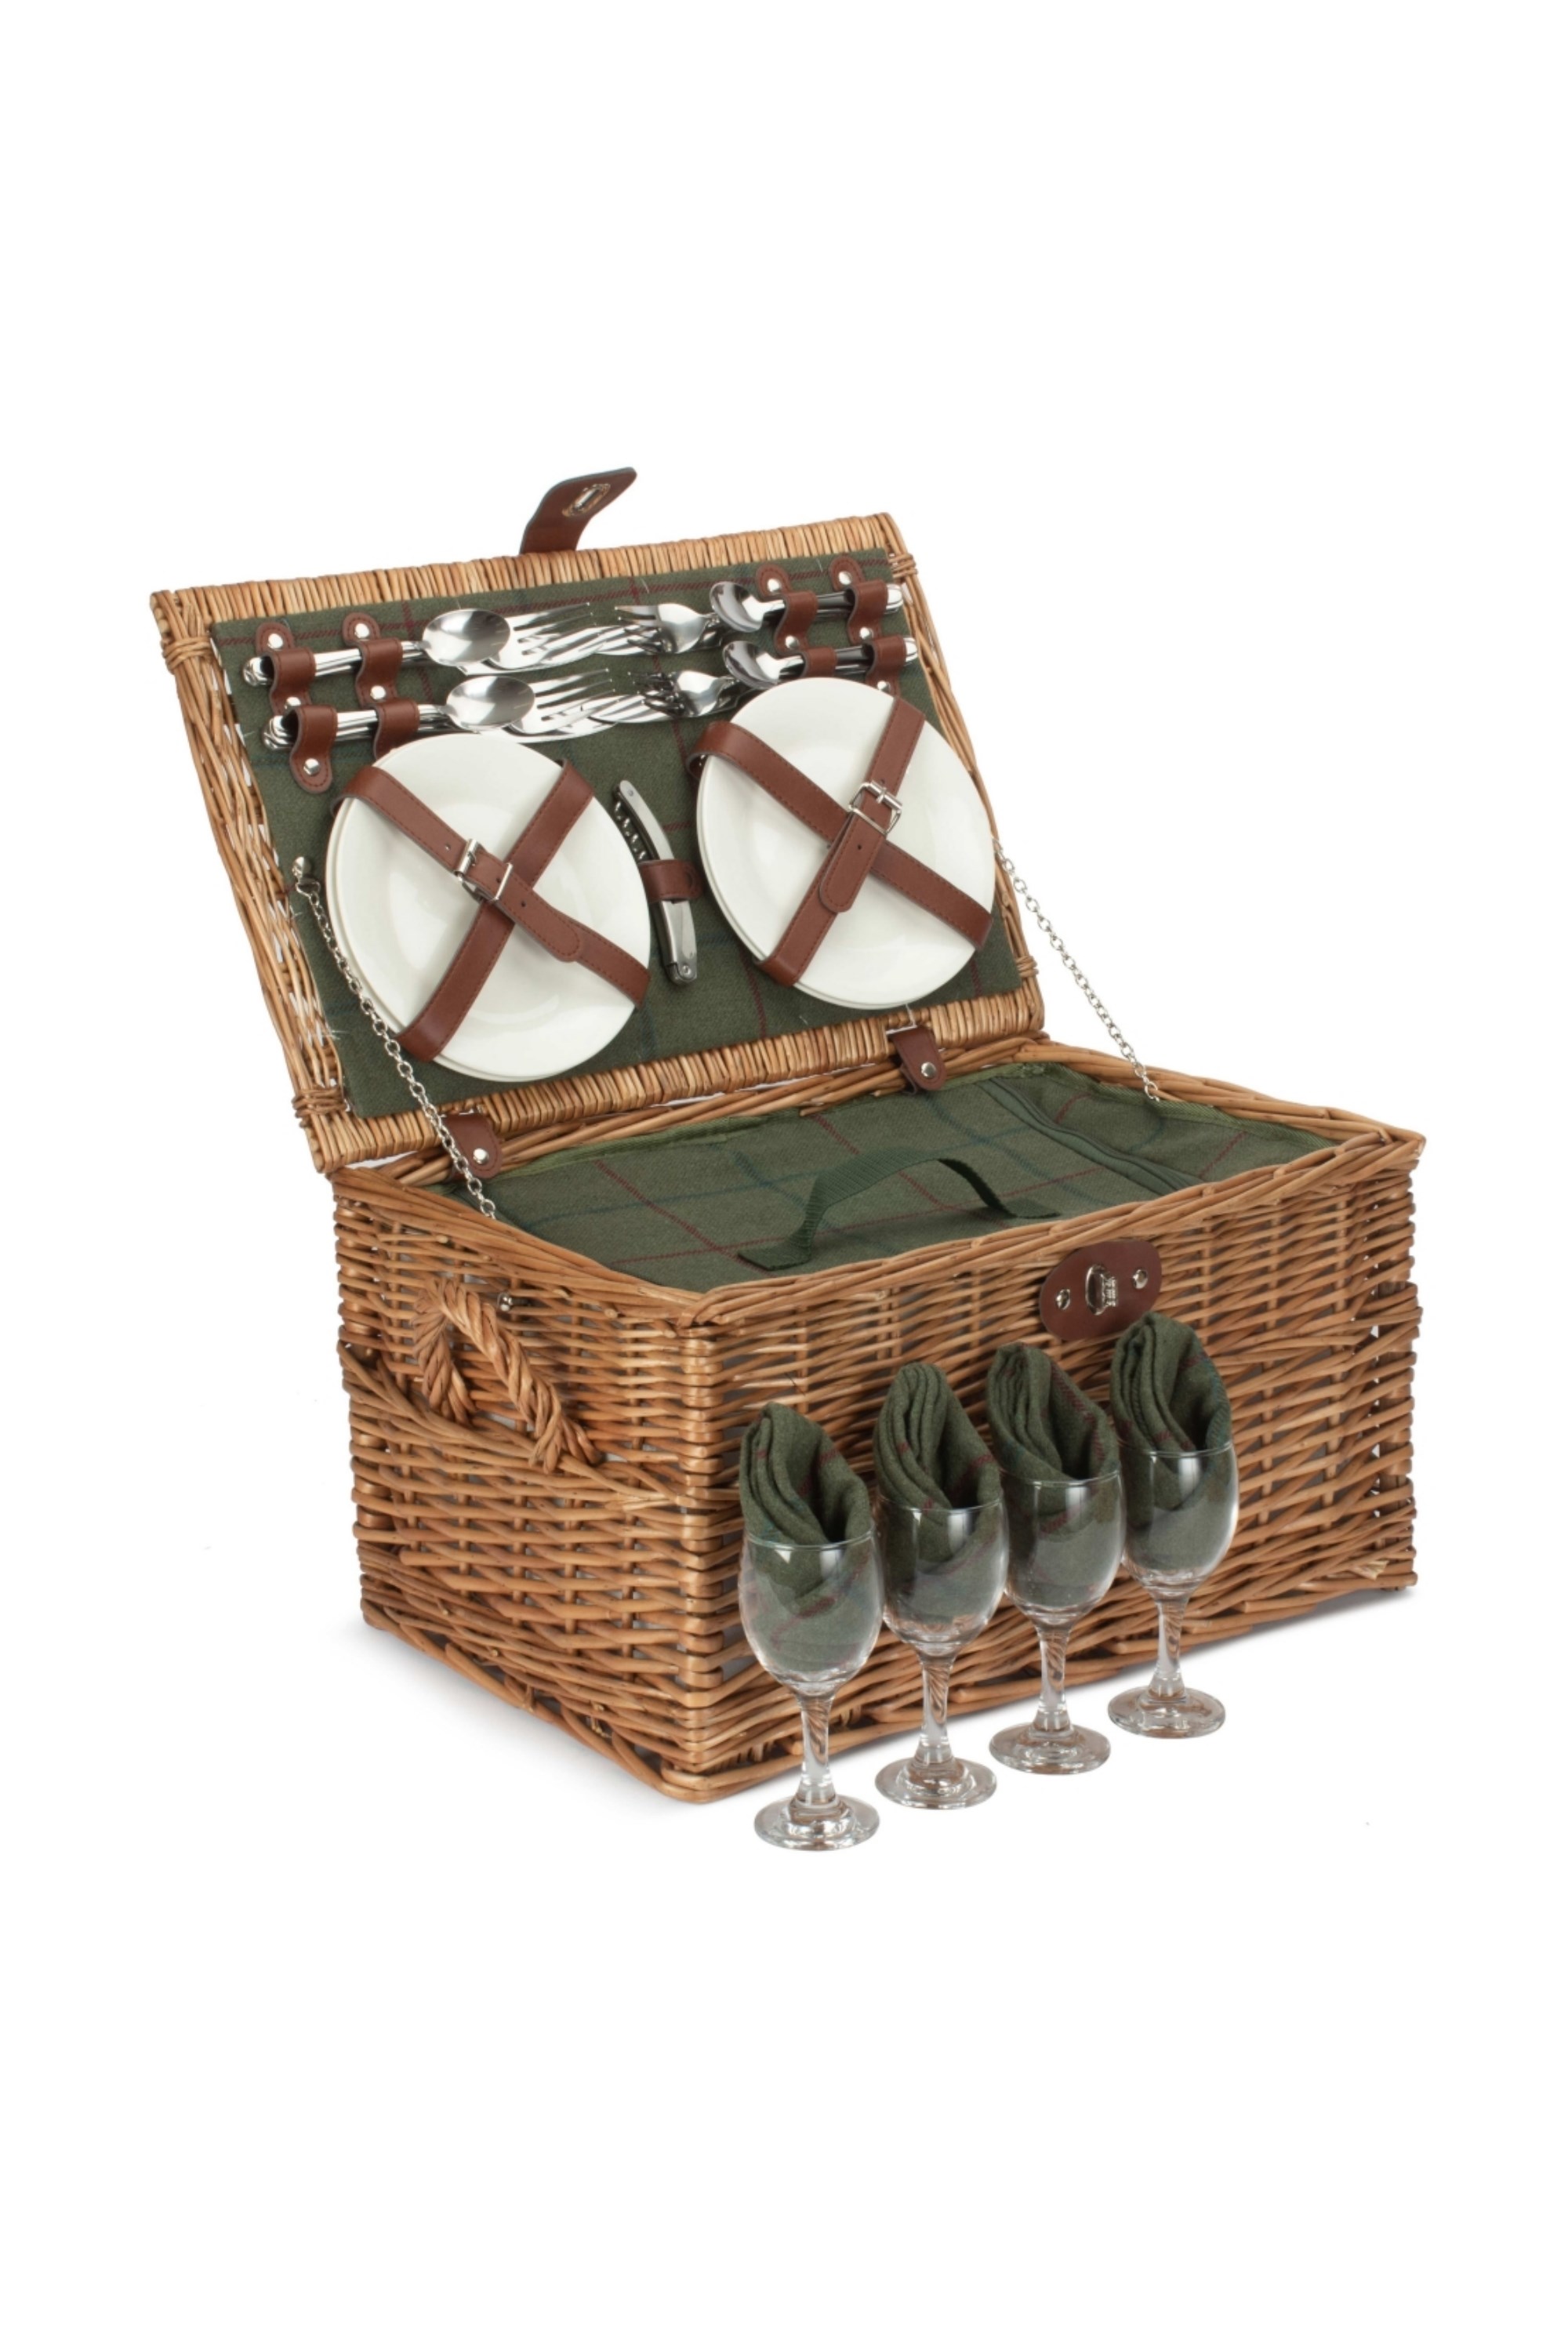 Four Person Green Tweed Chest Wicker Picnic Basket -